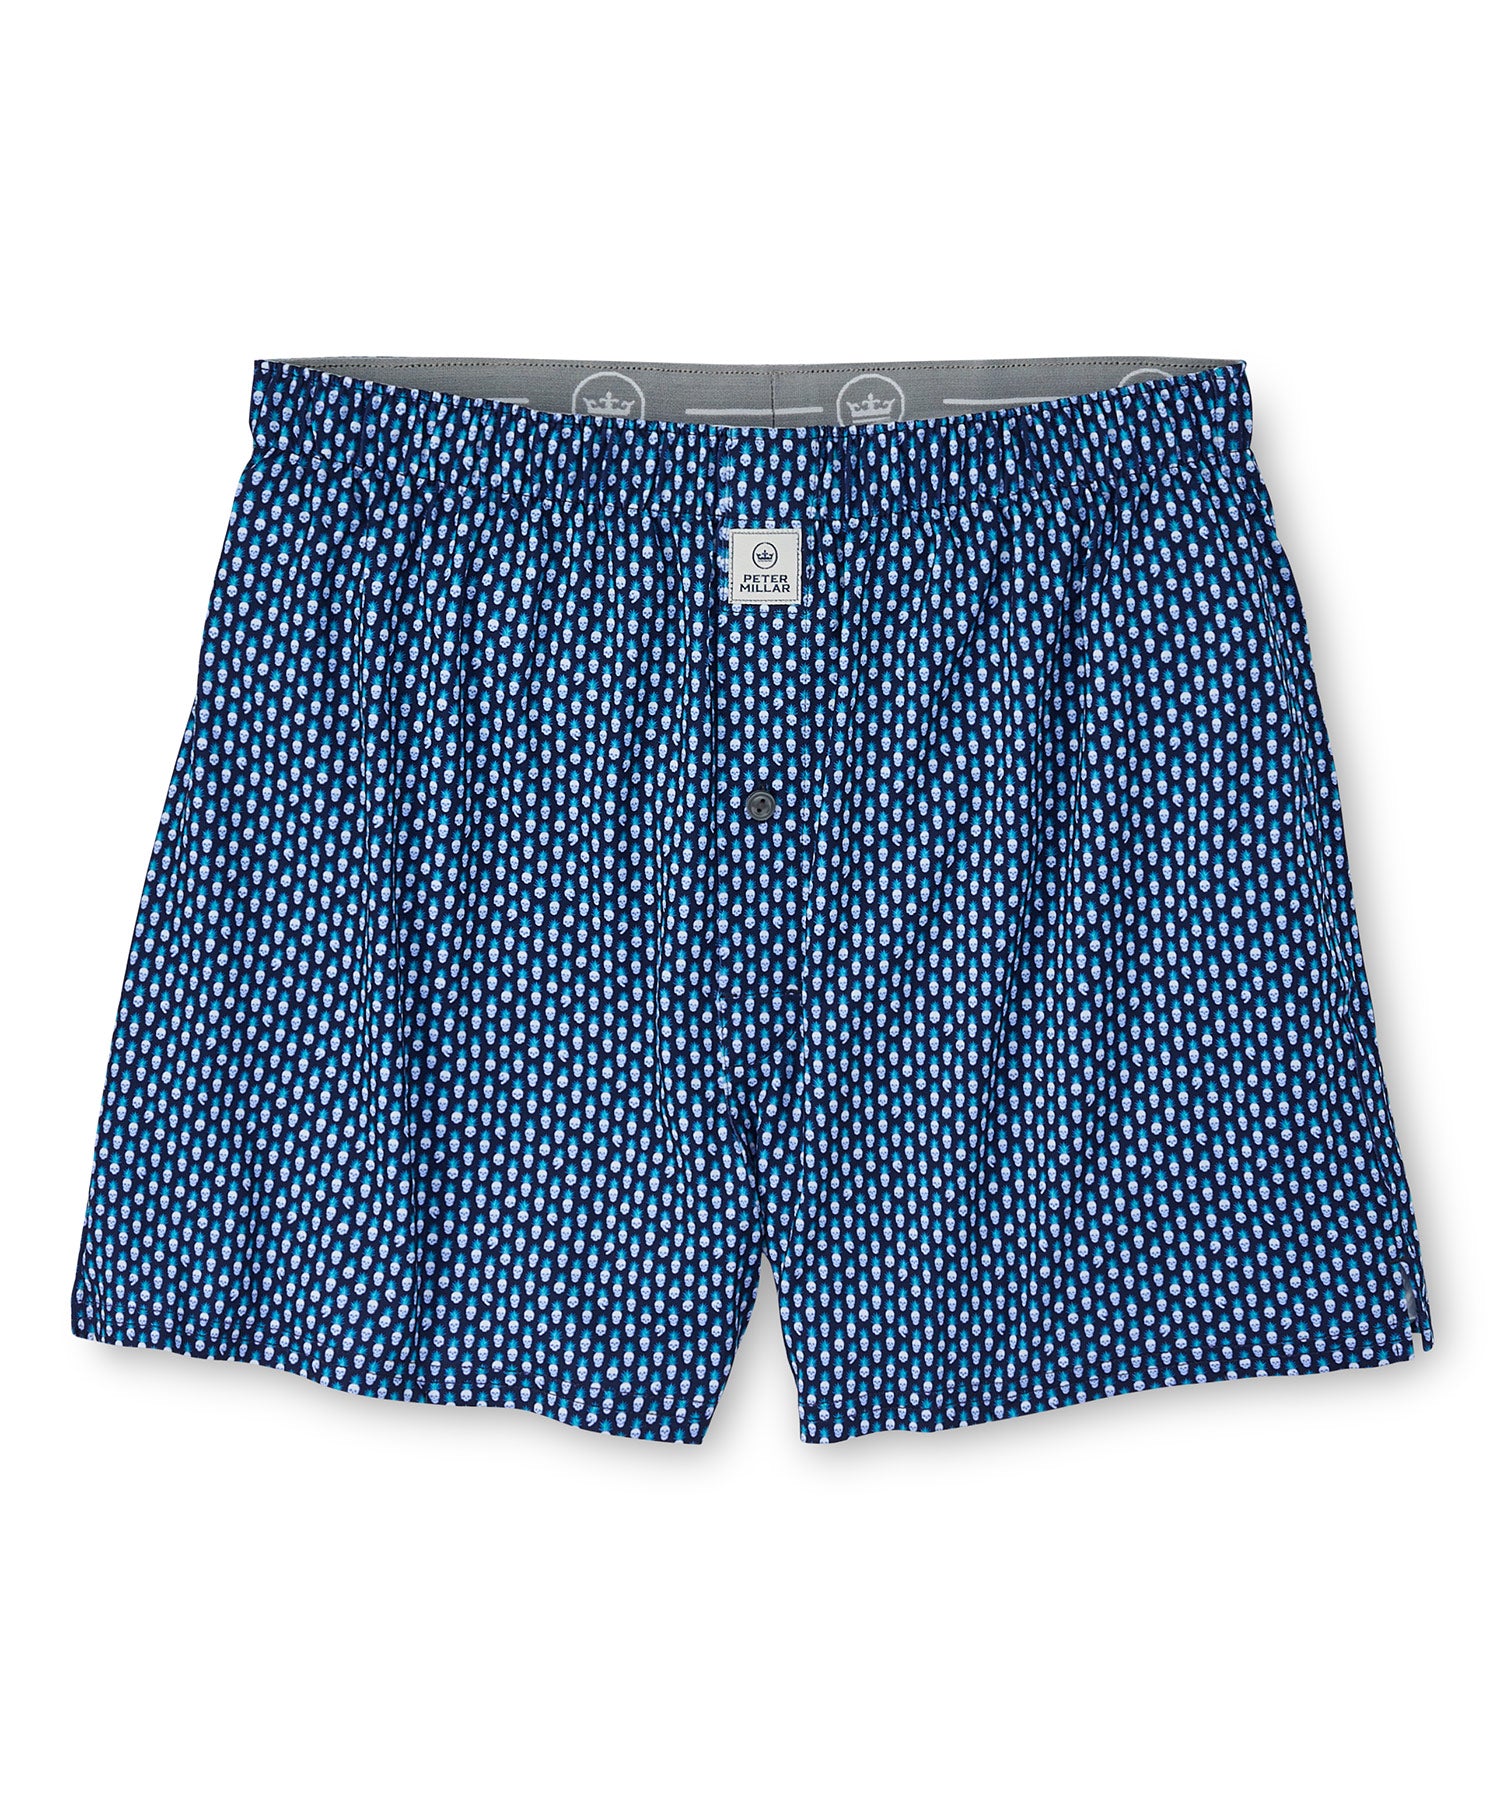 Day One Underwear  Boxer Shorts, Loungewear - Long-Cut Tapered